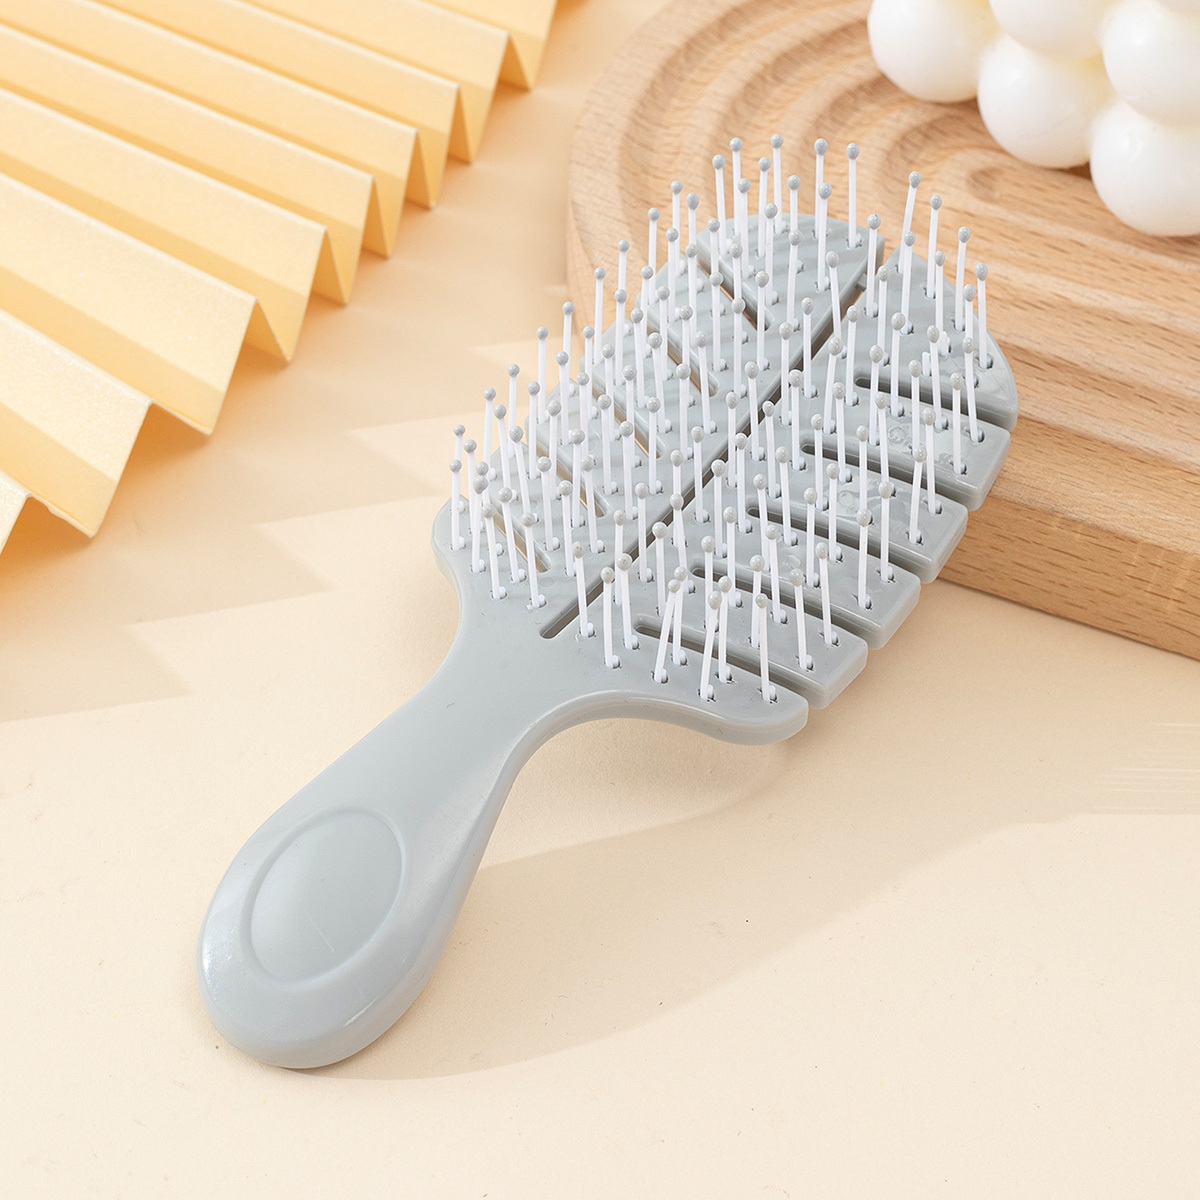 

Portable Small Leaf Hairbrush, Detangling Massage Comb, Smooth Handle, Home & Travel Hair Care Tool, Black/grey Options